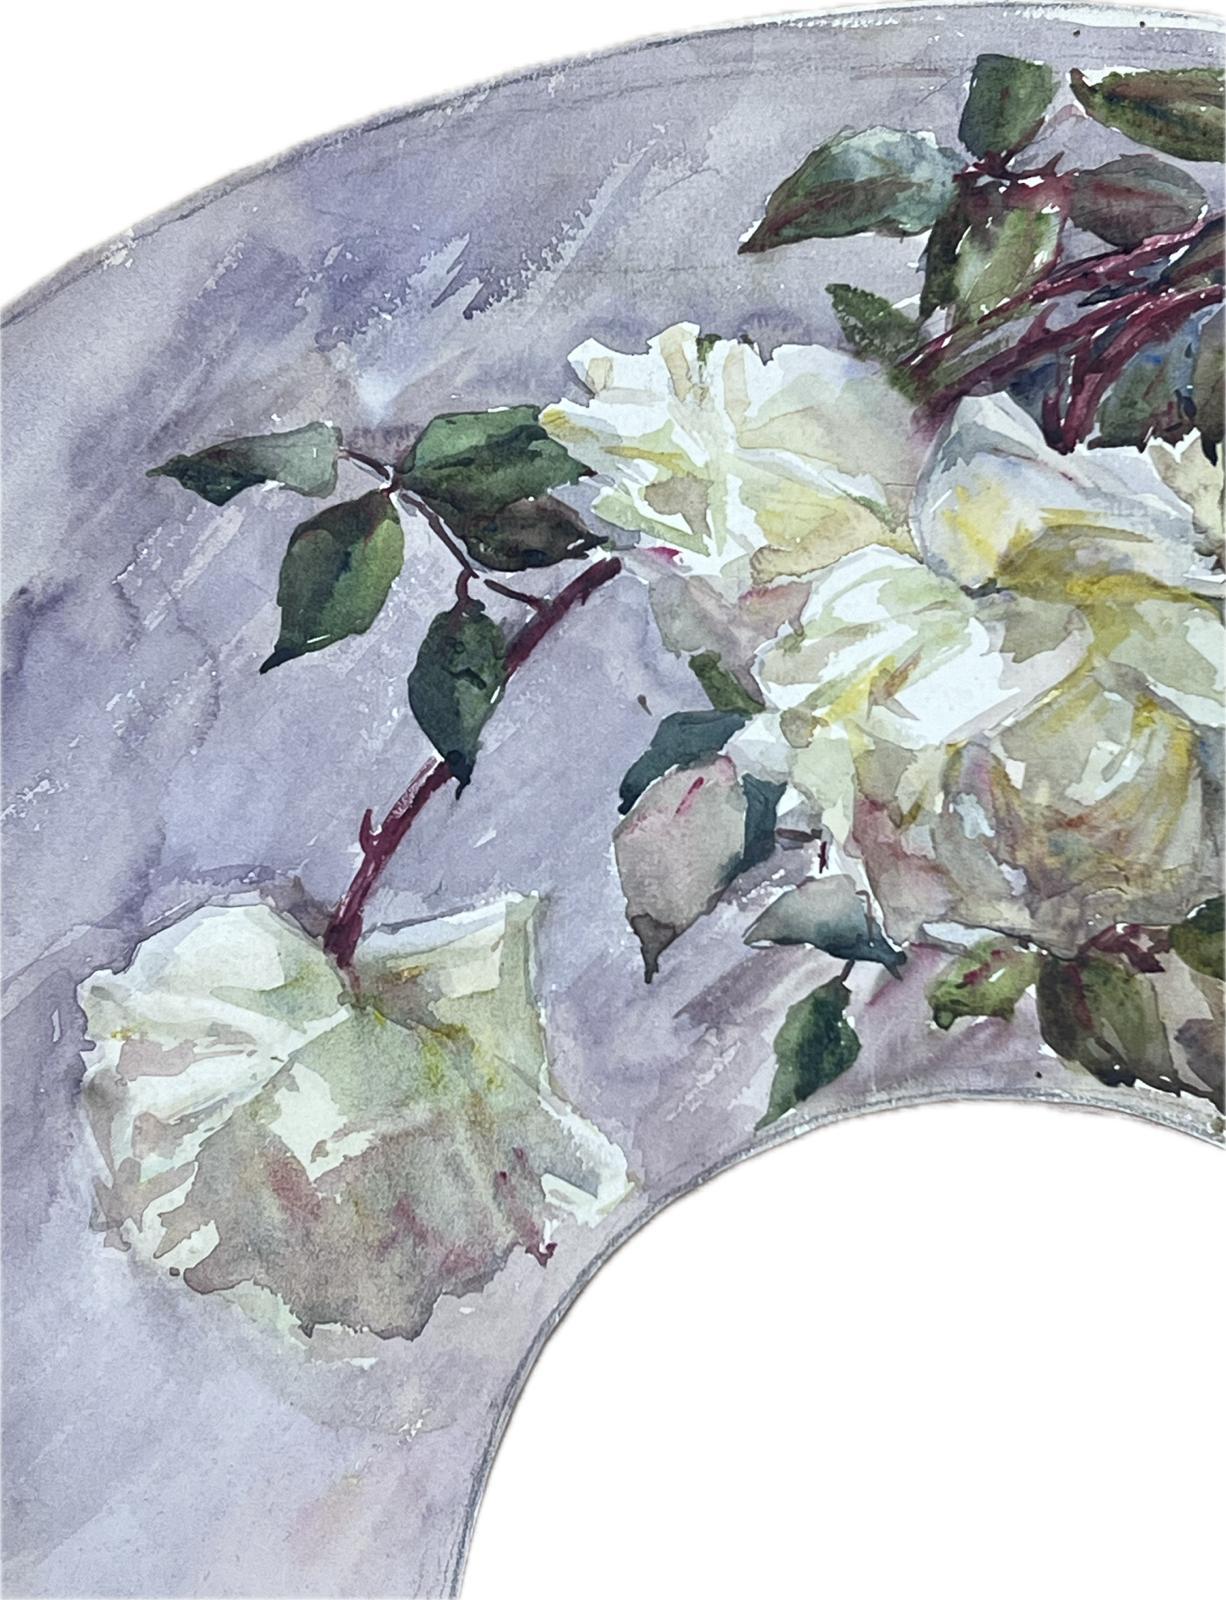 Roses 
by Louise Alix (French, 1888-1980) *see notes below
provenance stamp to the back 
watercolour painting on artist paper, unframed
measures: 14 high by 22 inches wide
condition: overall very good and sound, a few scuffs and marks to the surface